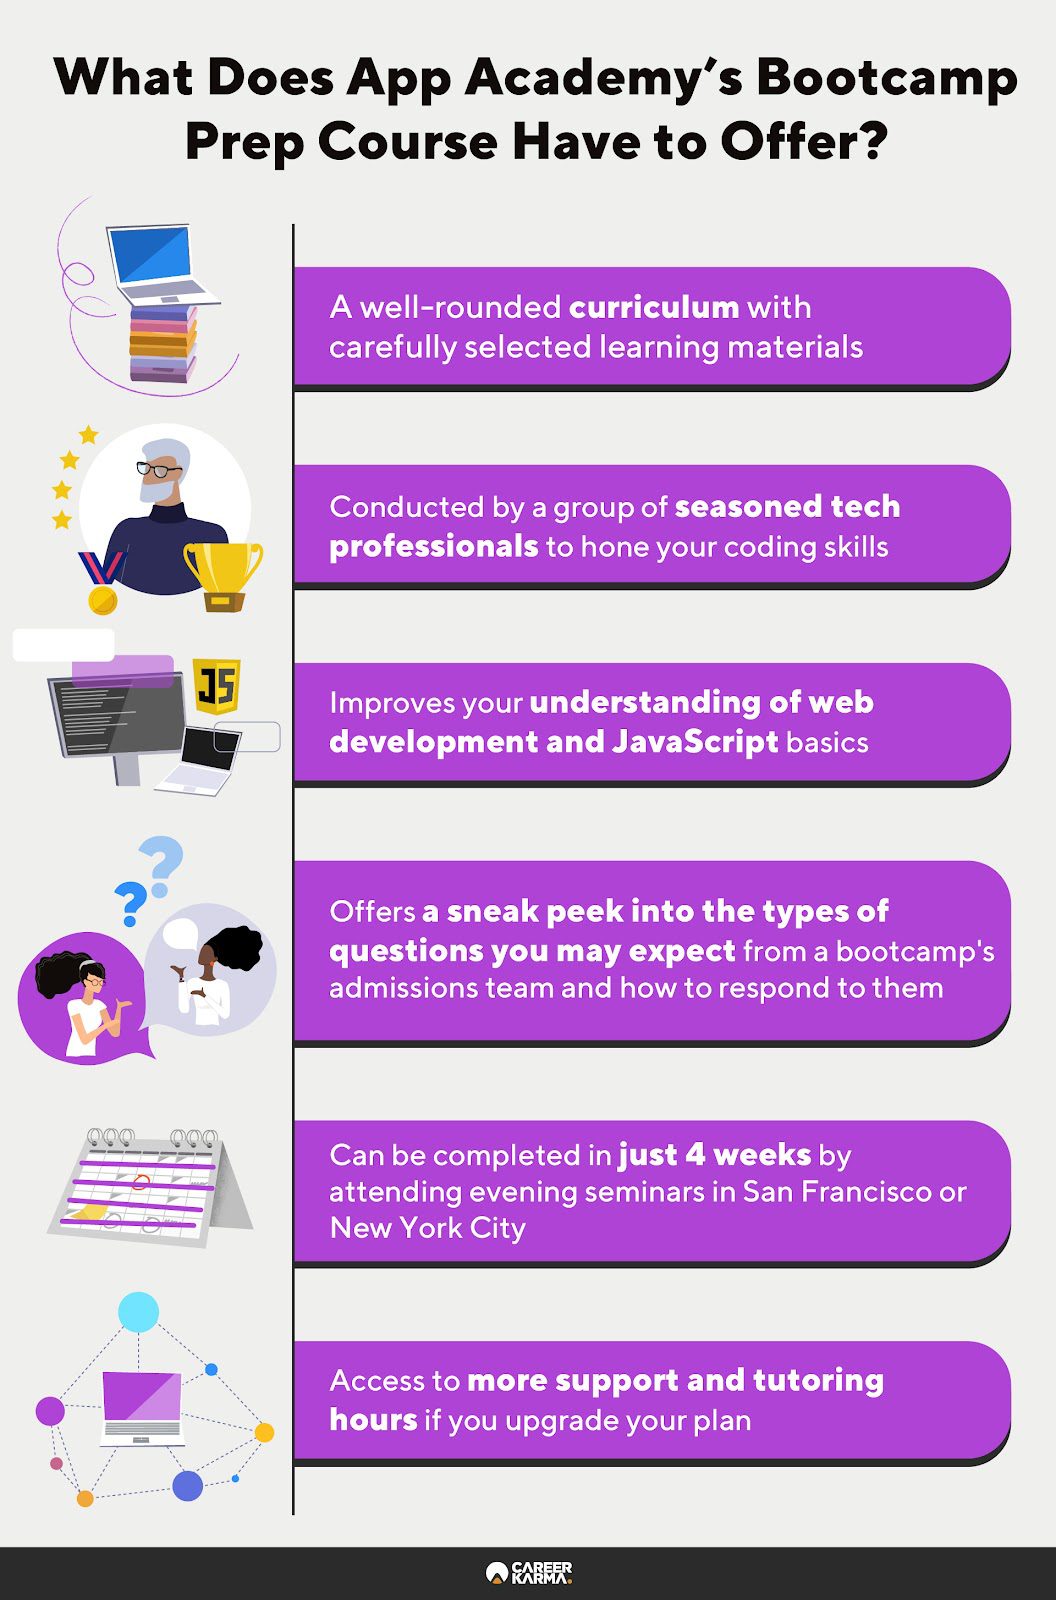 An infographic highlighting the benefits of taking App Academy’s Bootcamp Prep course